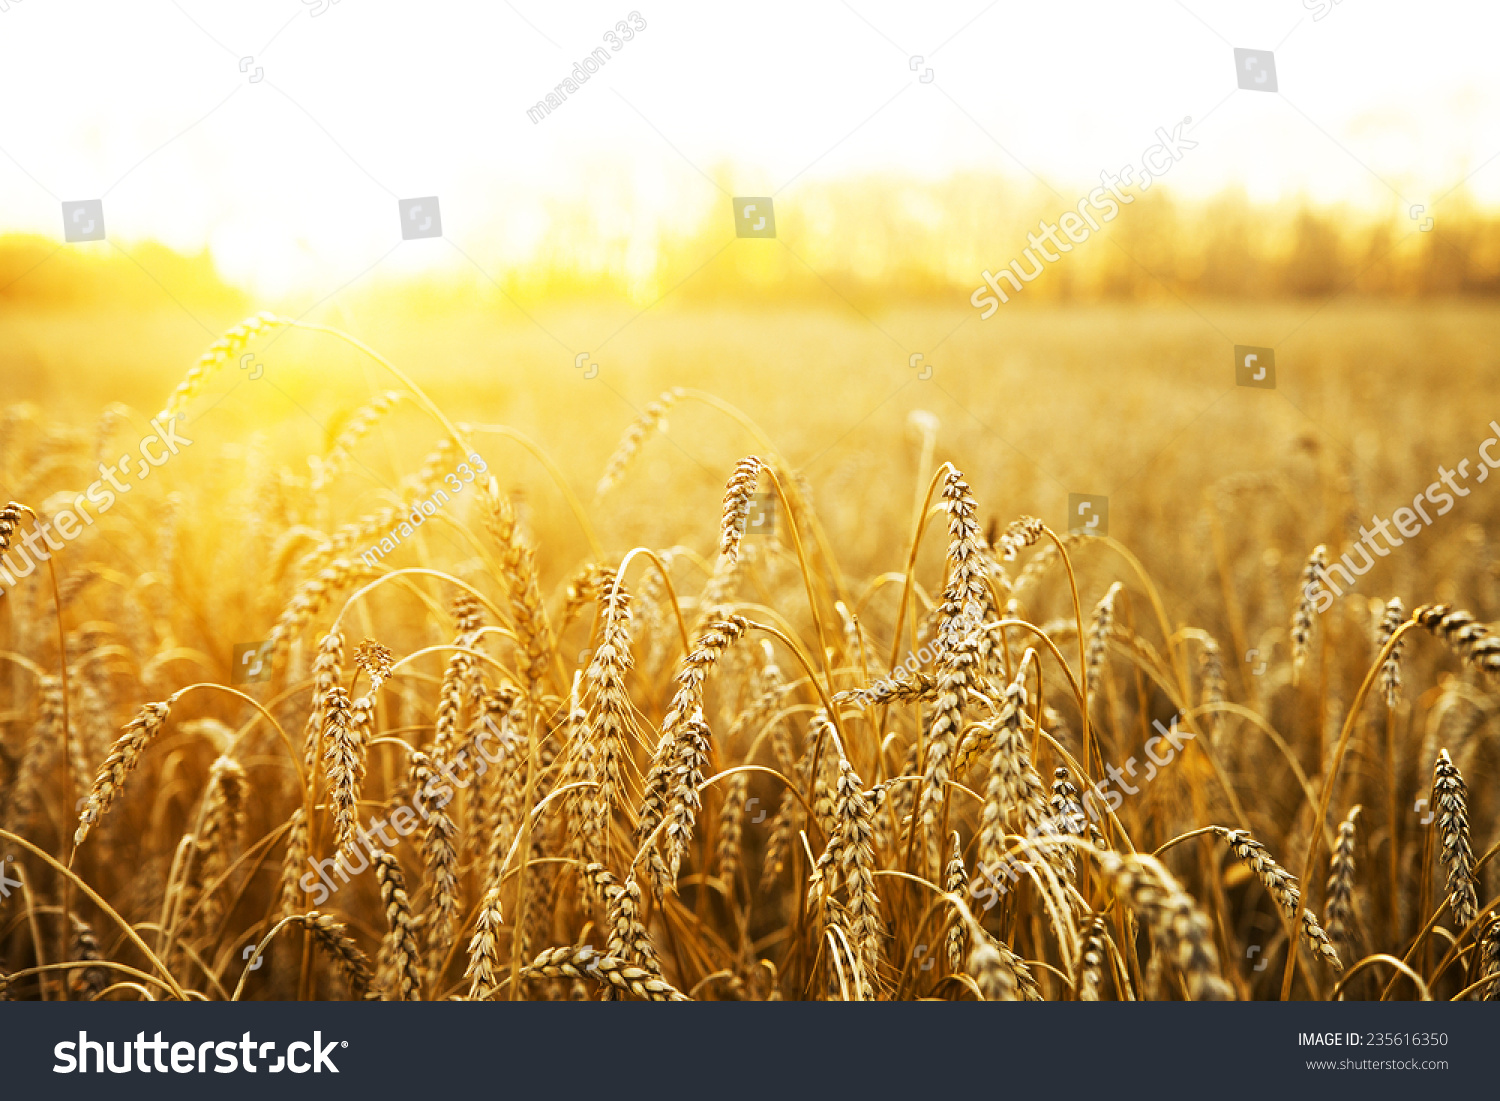 backdrop of ripening ears of yellow wheat field on the sunset cloudy orange sky background Copy space of the setting sun rays on horizon in rural meadow Close up nature photo Idea of a rich harvest #235616350